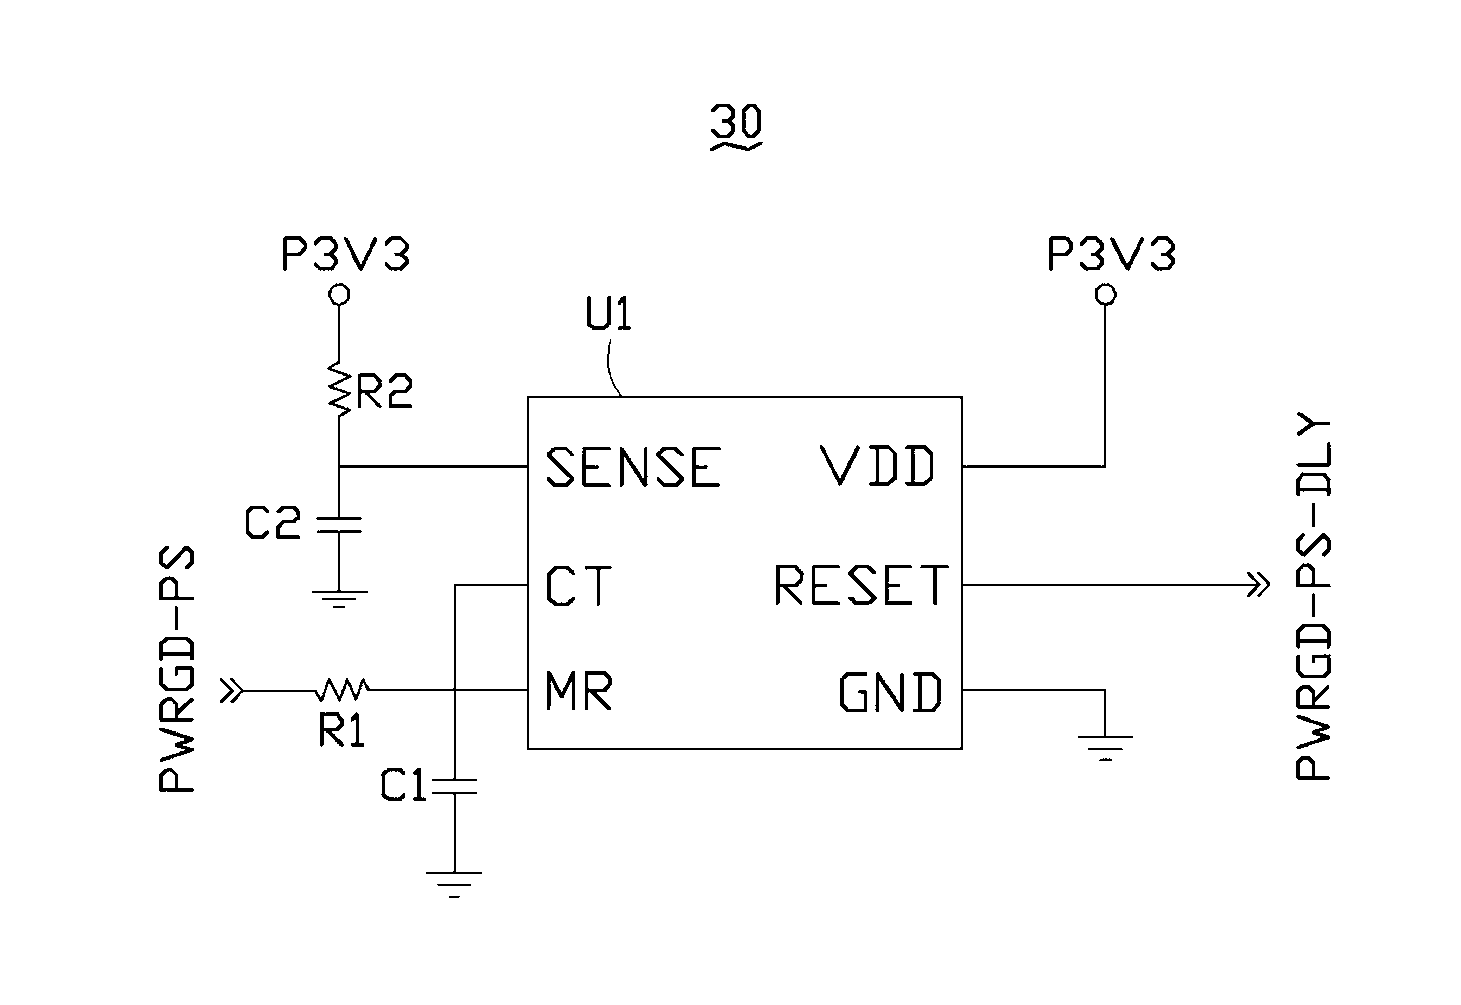 Card device driving circuit